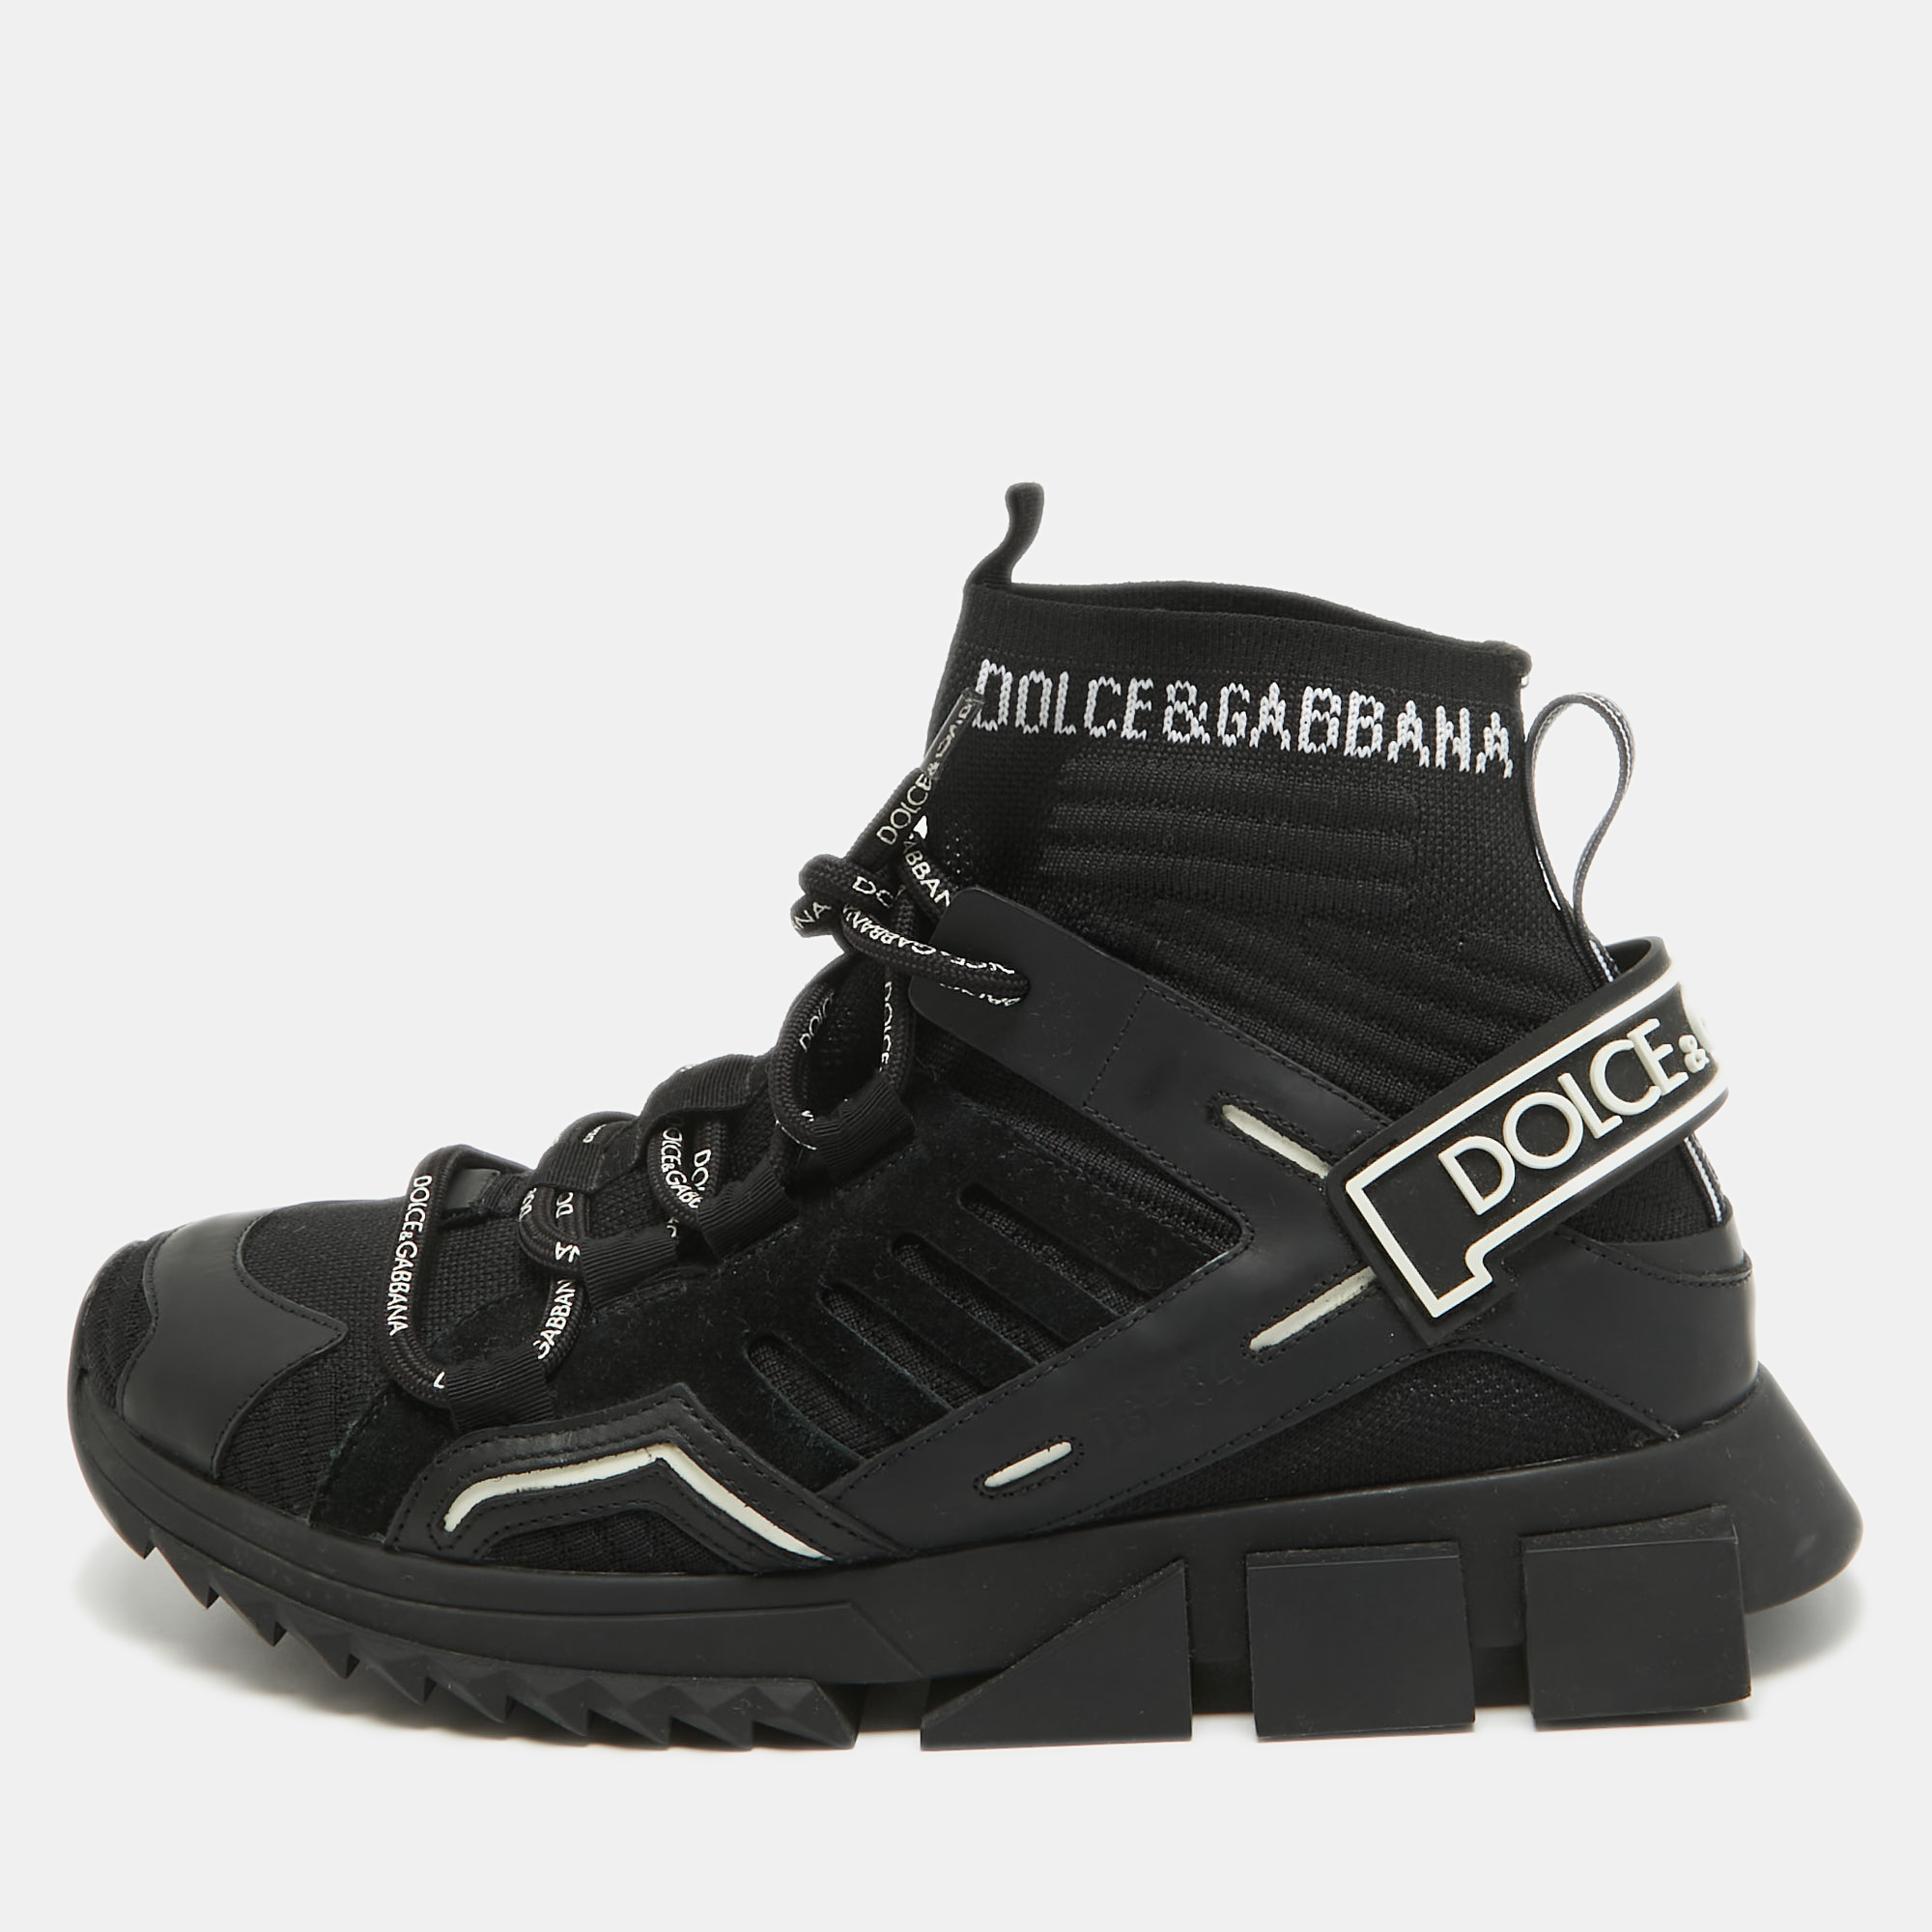 

Dolce & Gabbana Black Knit Fabric and Suede Sorrento High Top Sneakers Size